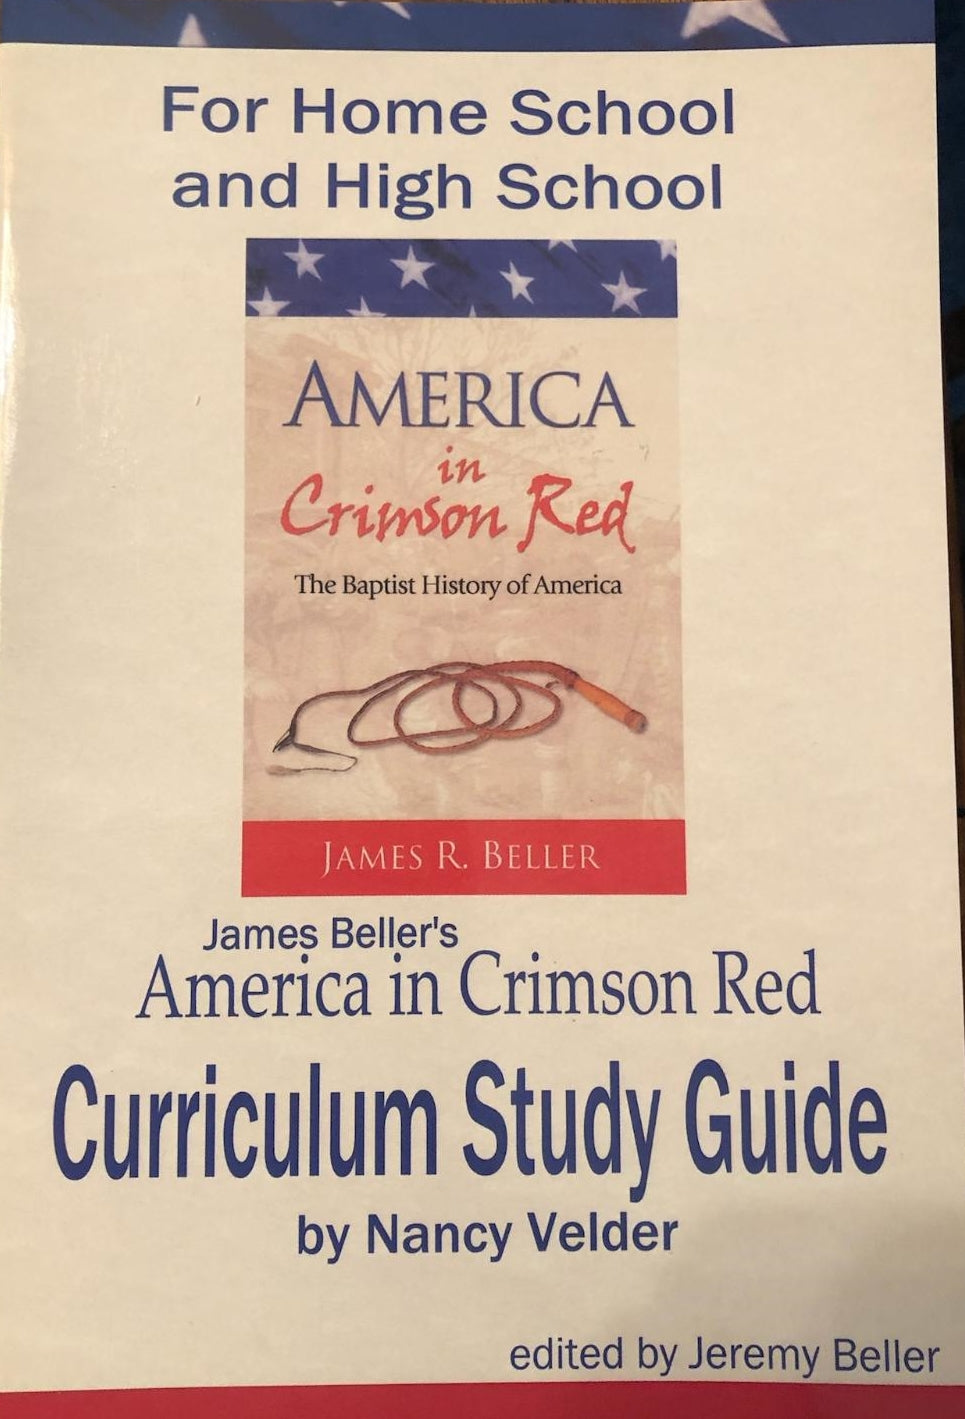 Study guide for Home School and High School edition of America in Crimson Red. Limited quantity remaining.